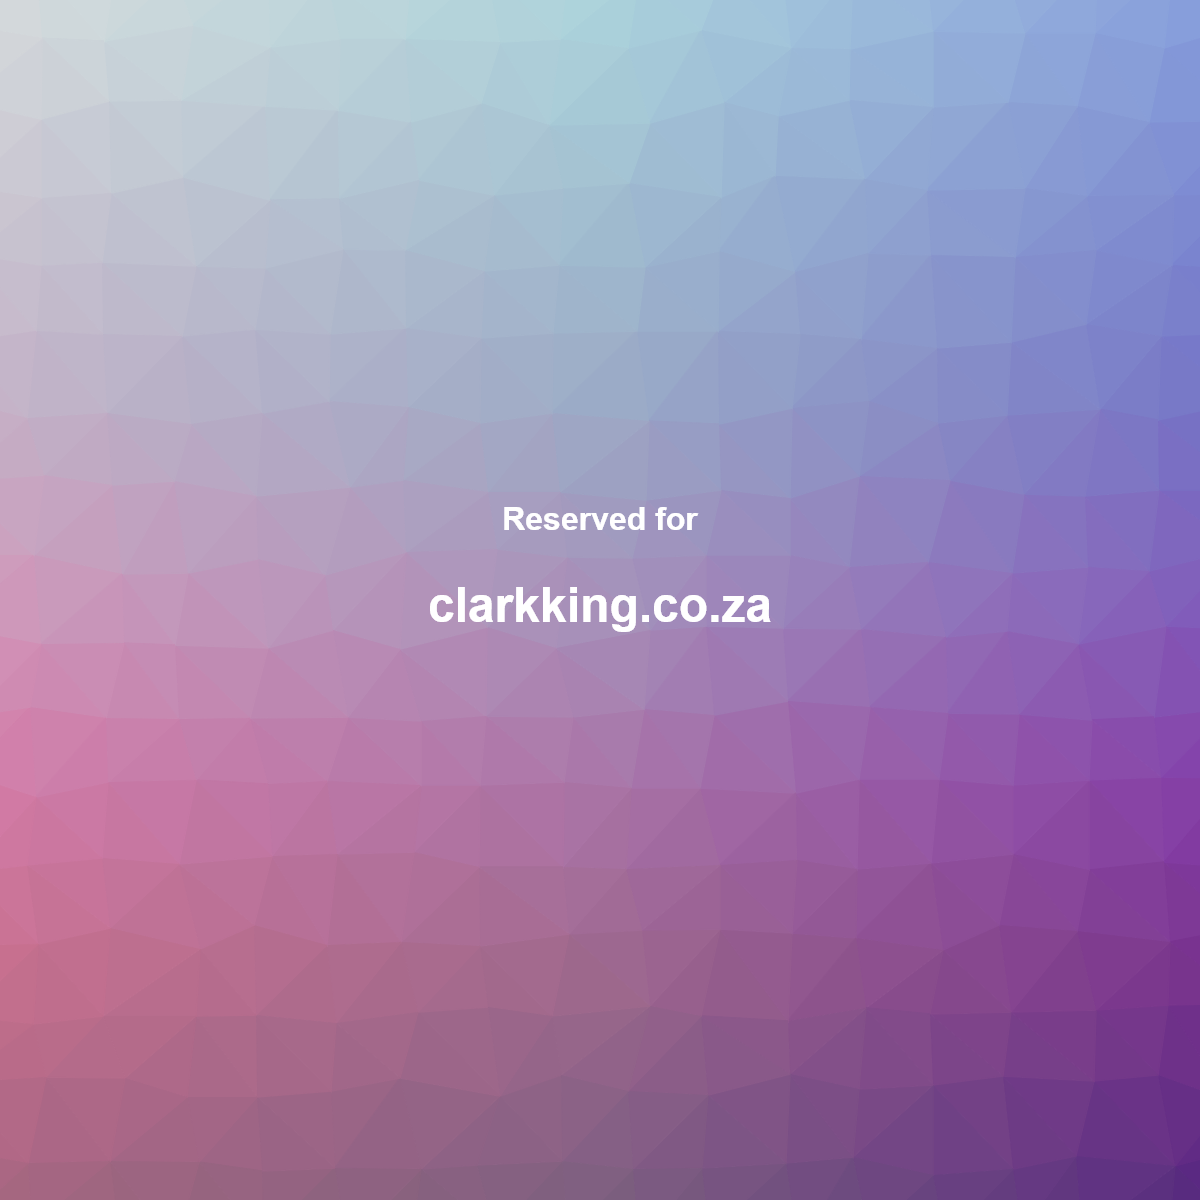 A complete backup of clarkking.co.za